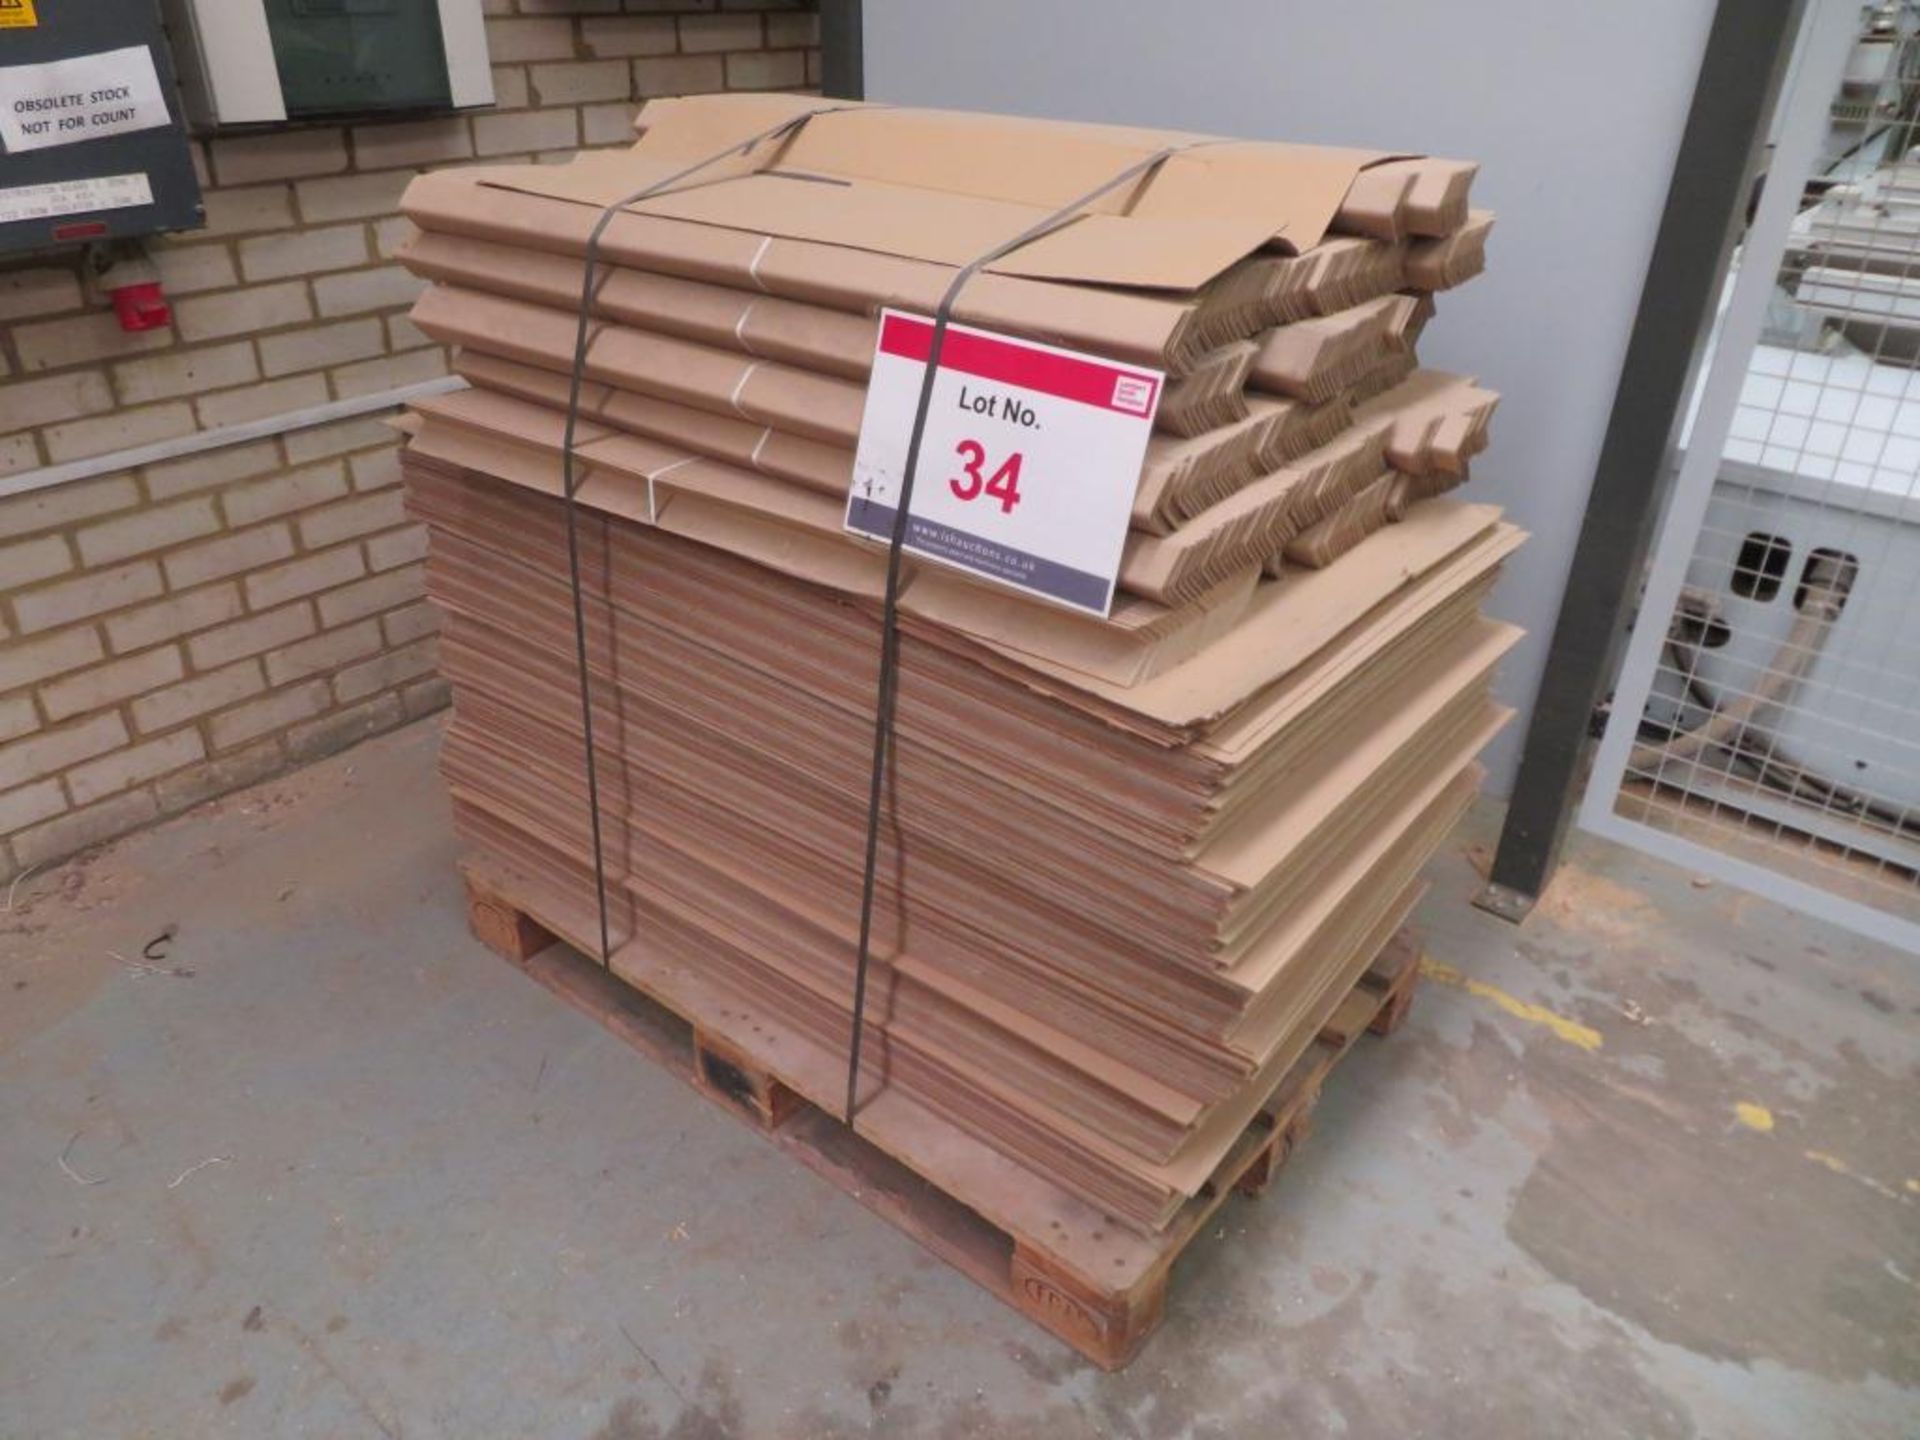 A pallet of cardboard sheets and corner protectors